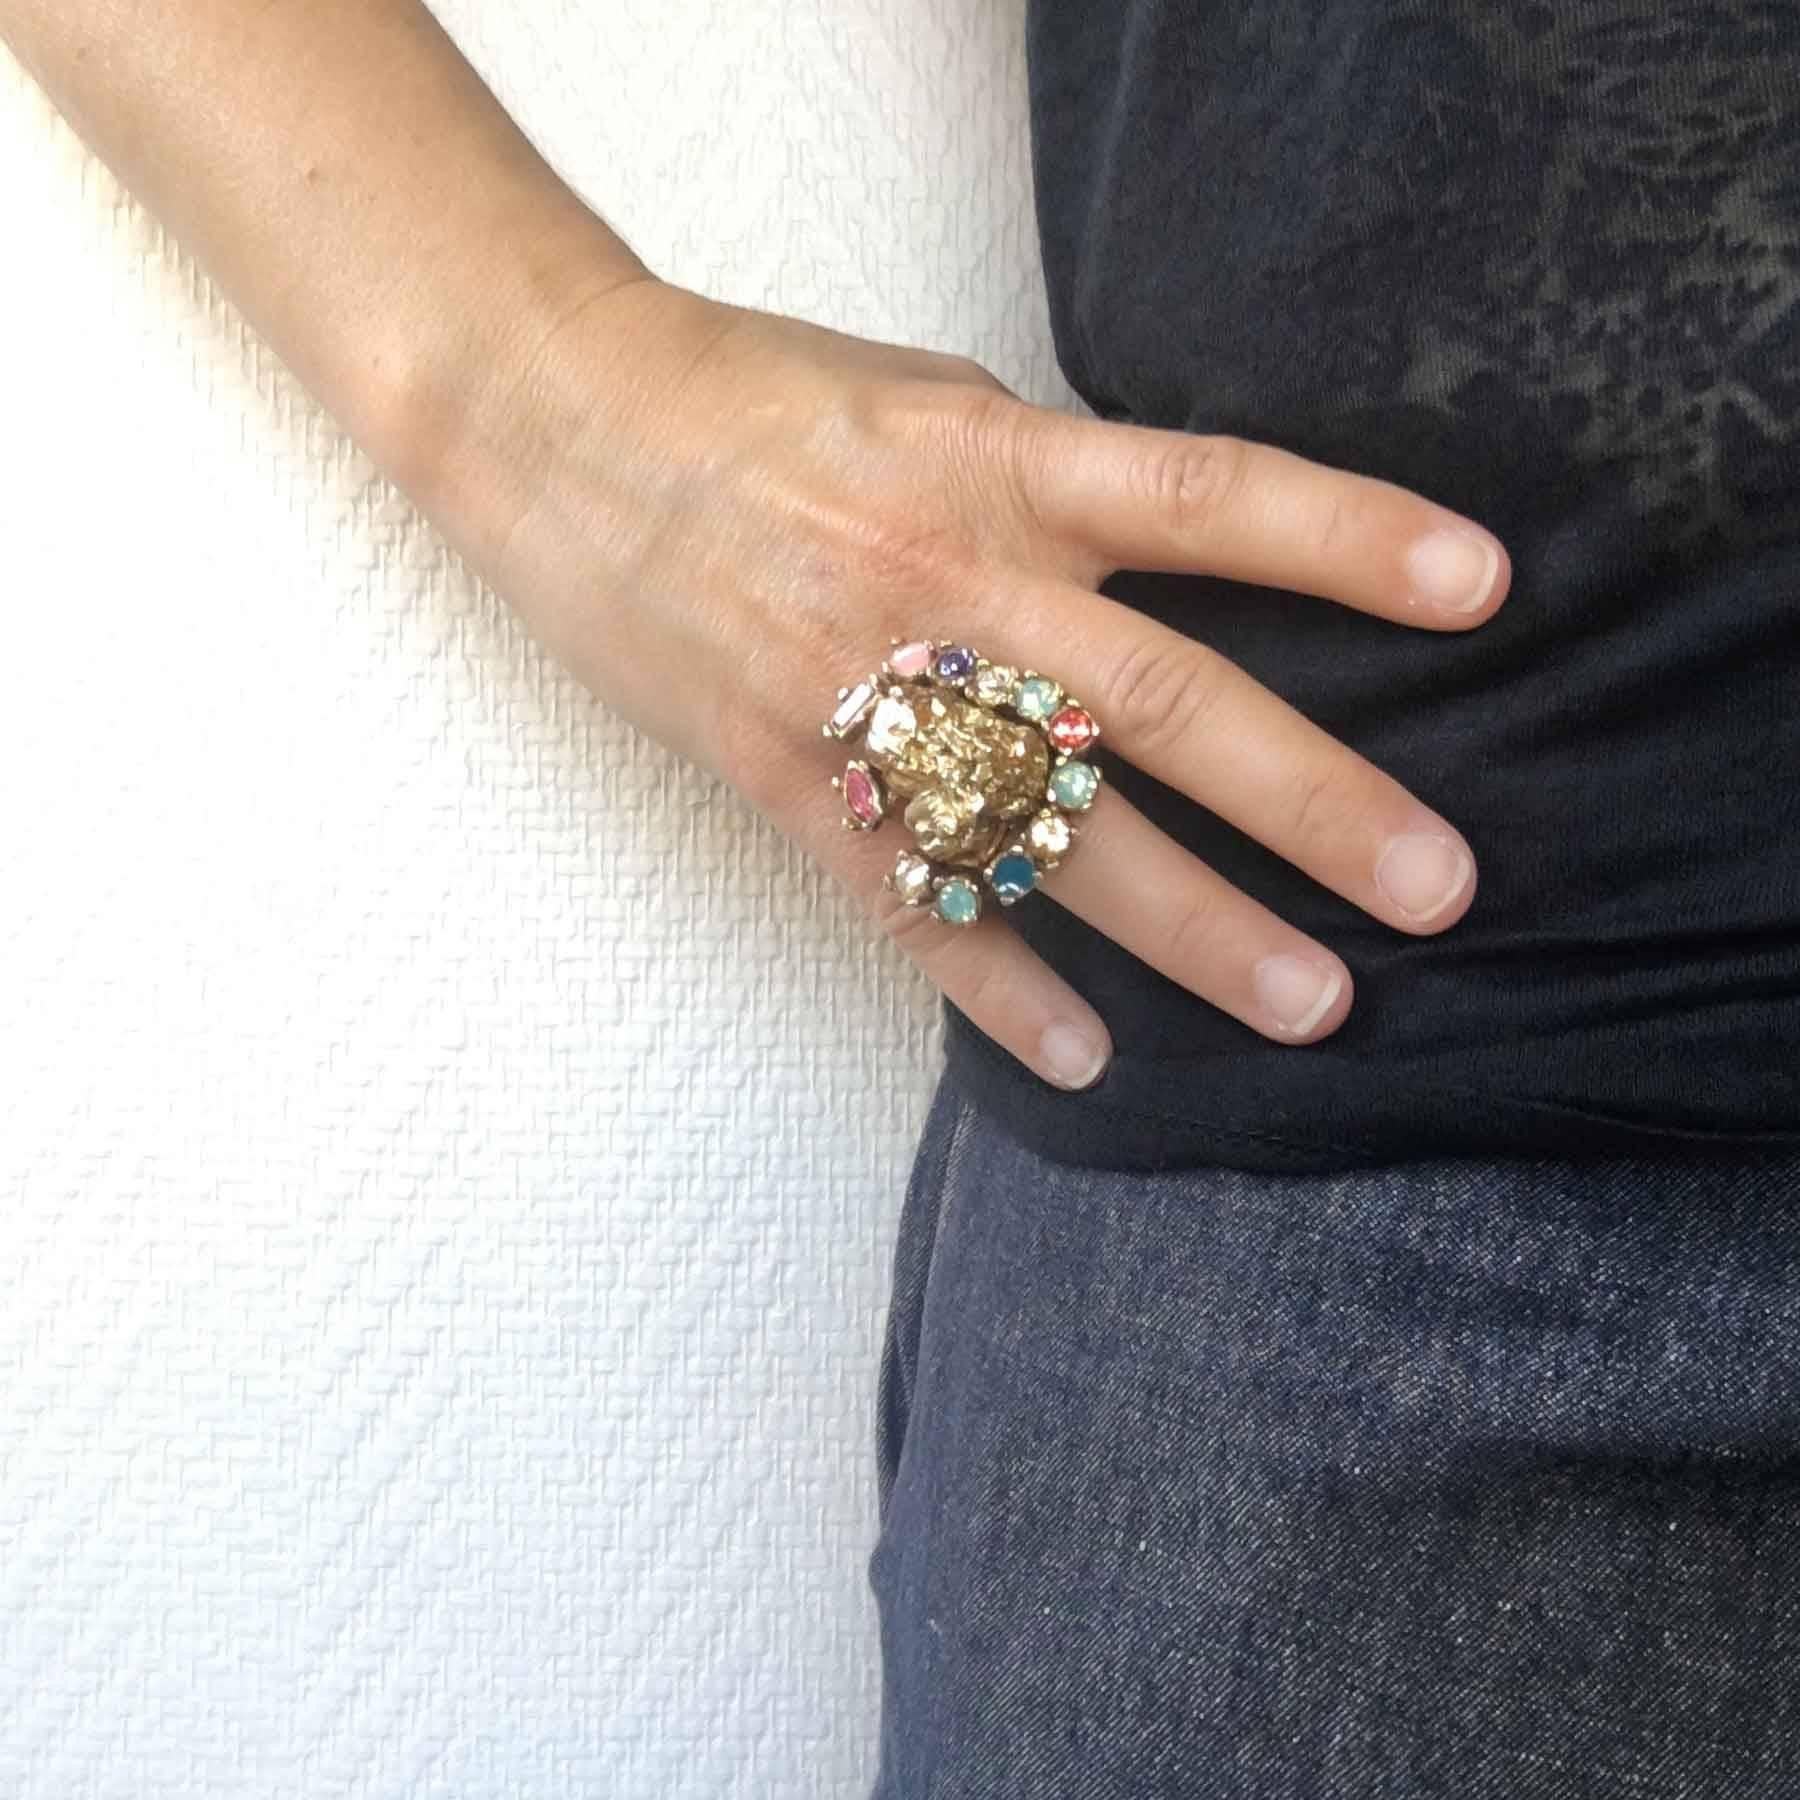 Very beautiful vintage Yves Saint Laurent heart ring in gilded metal set with rhinestones of various colors: pink, blue, green and transparent. Size: 49

Dimensions: heart: 4,6x4,3 cm

Delivered in a Valois Vintage Paris dust bag 